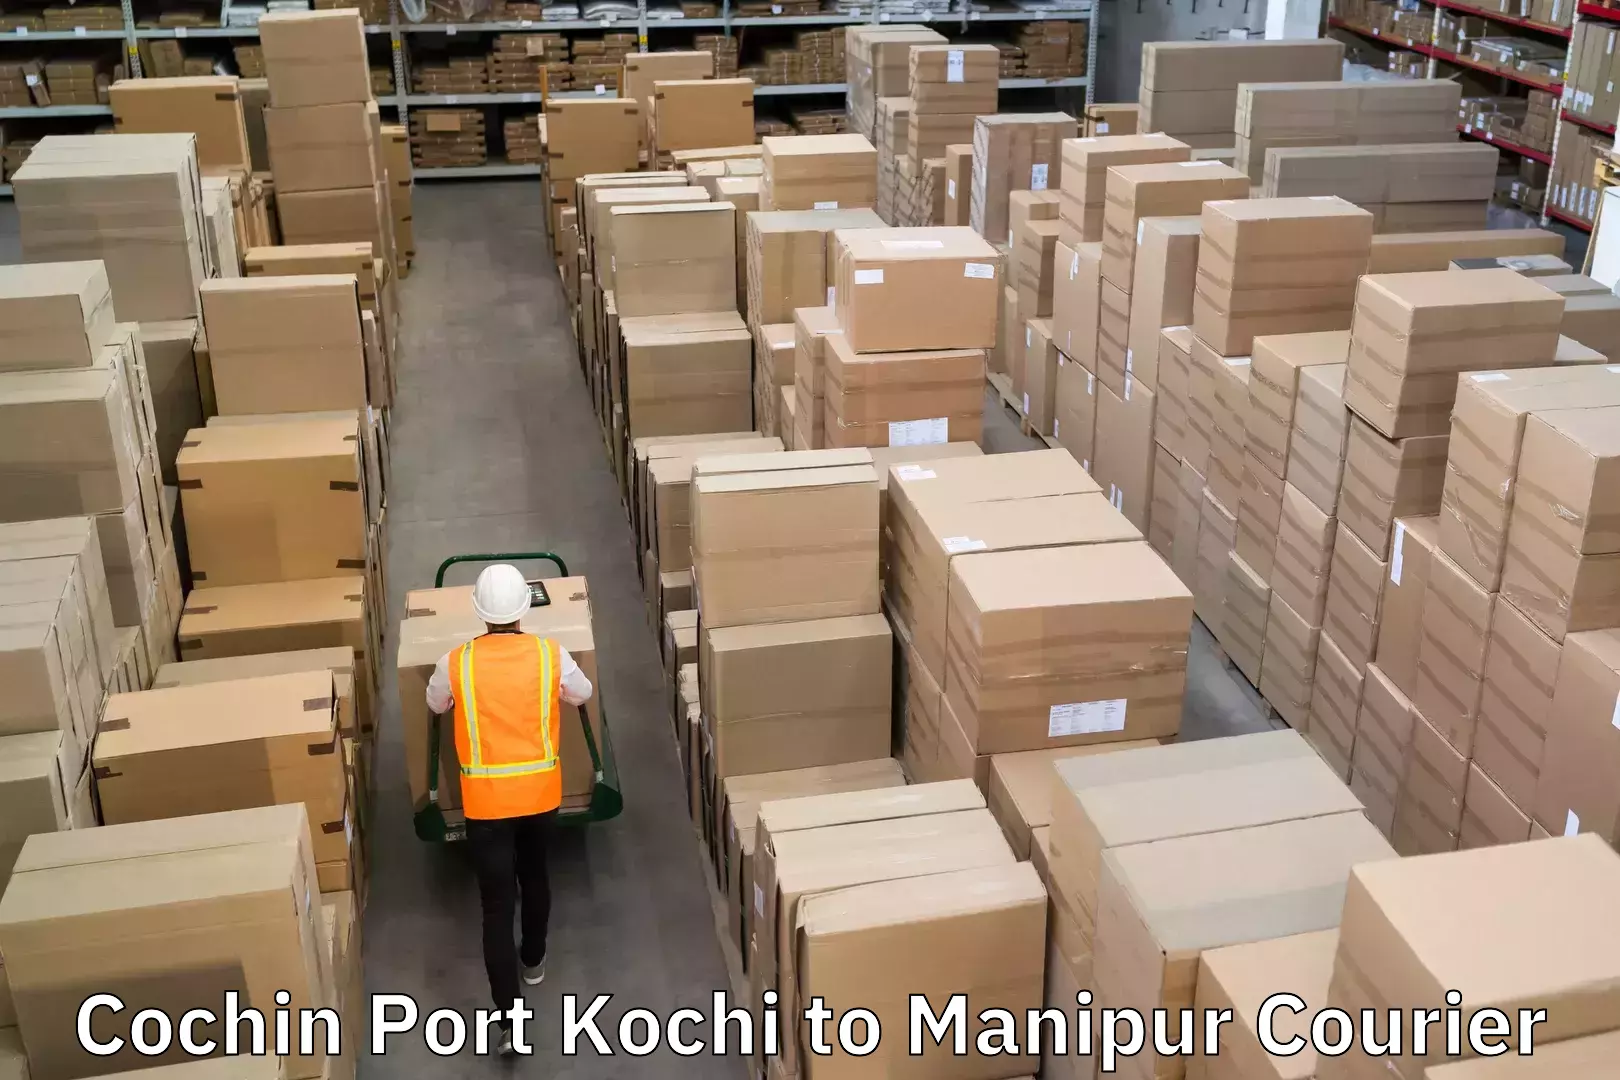 Next-day freight services Cochin Port Kochi to Manipur